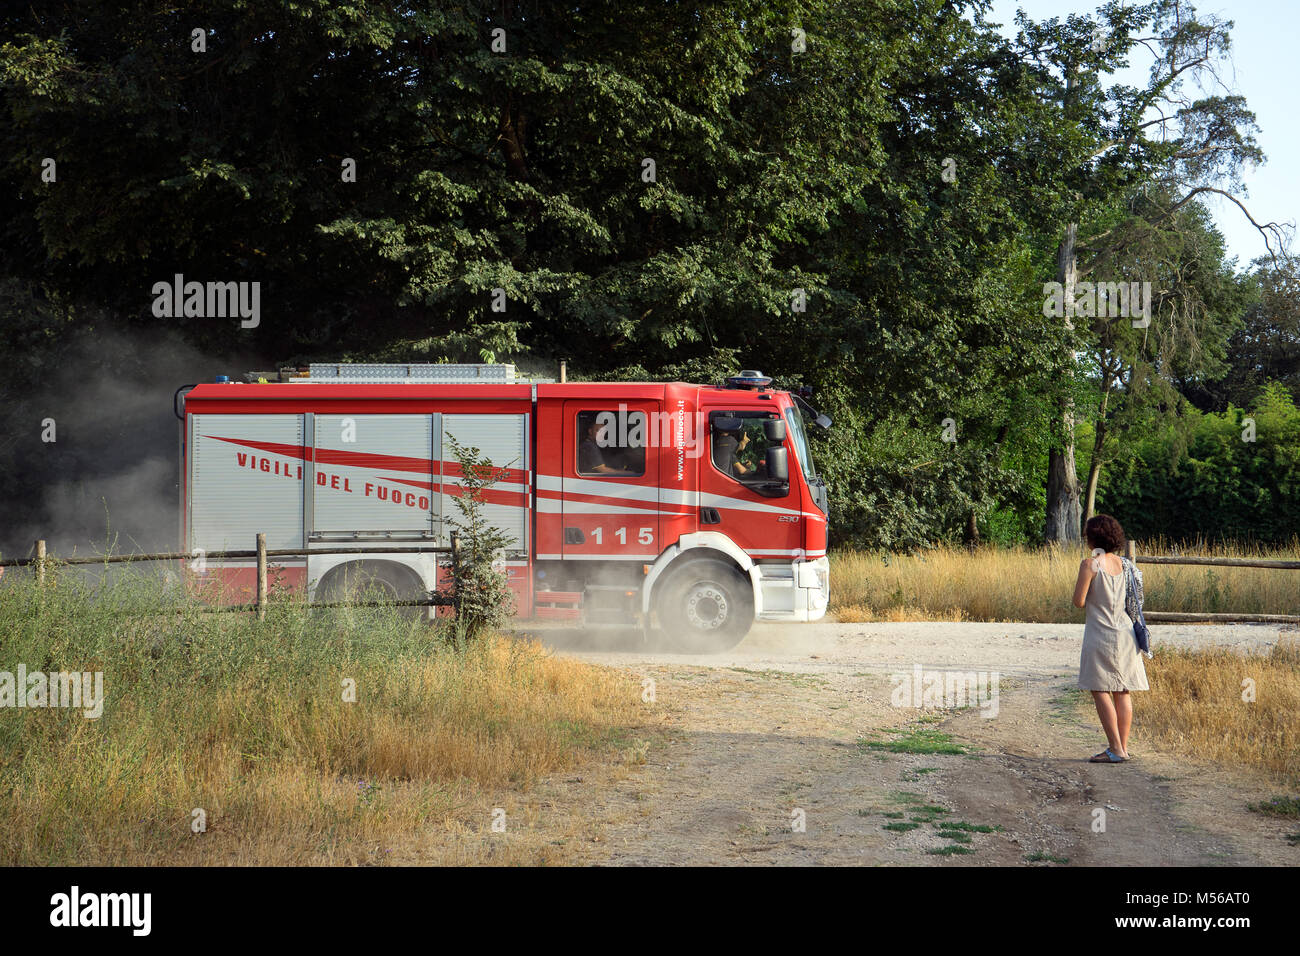 Rome, Italy: a Rome fire fighters truck runs along the dirt roads of Villa Ada in Rome after a call to 115 for a suspected outbreak of fire. Stock Photo